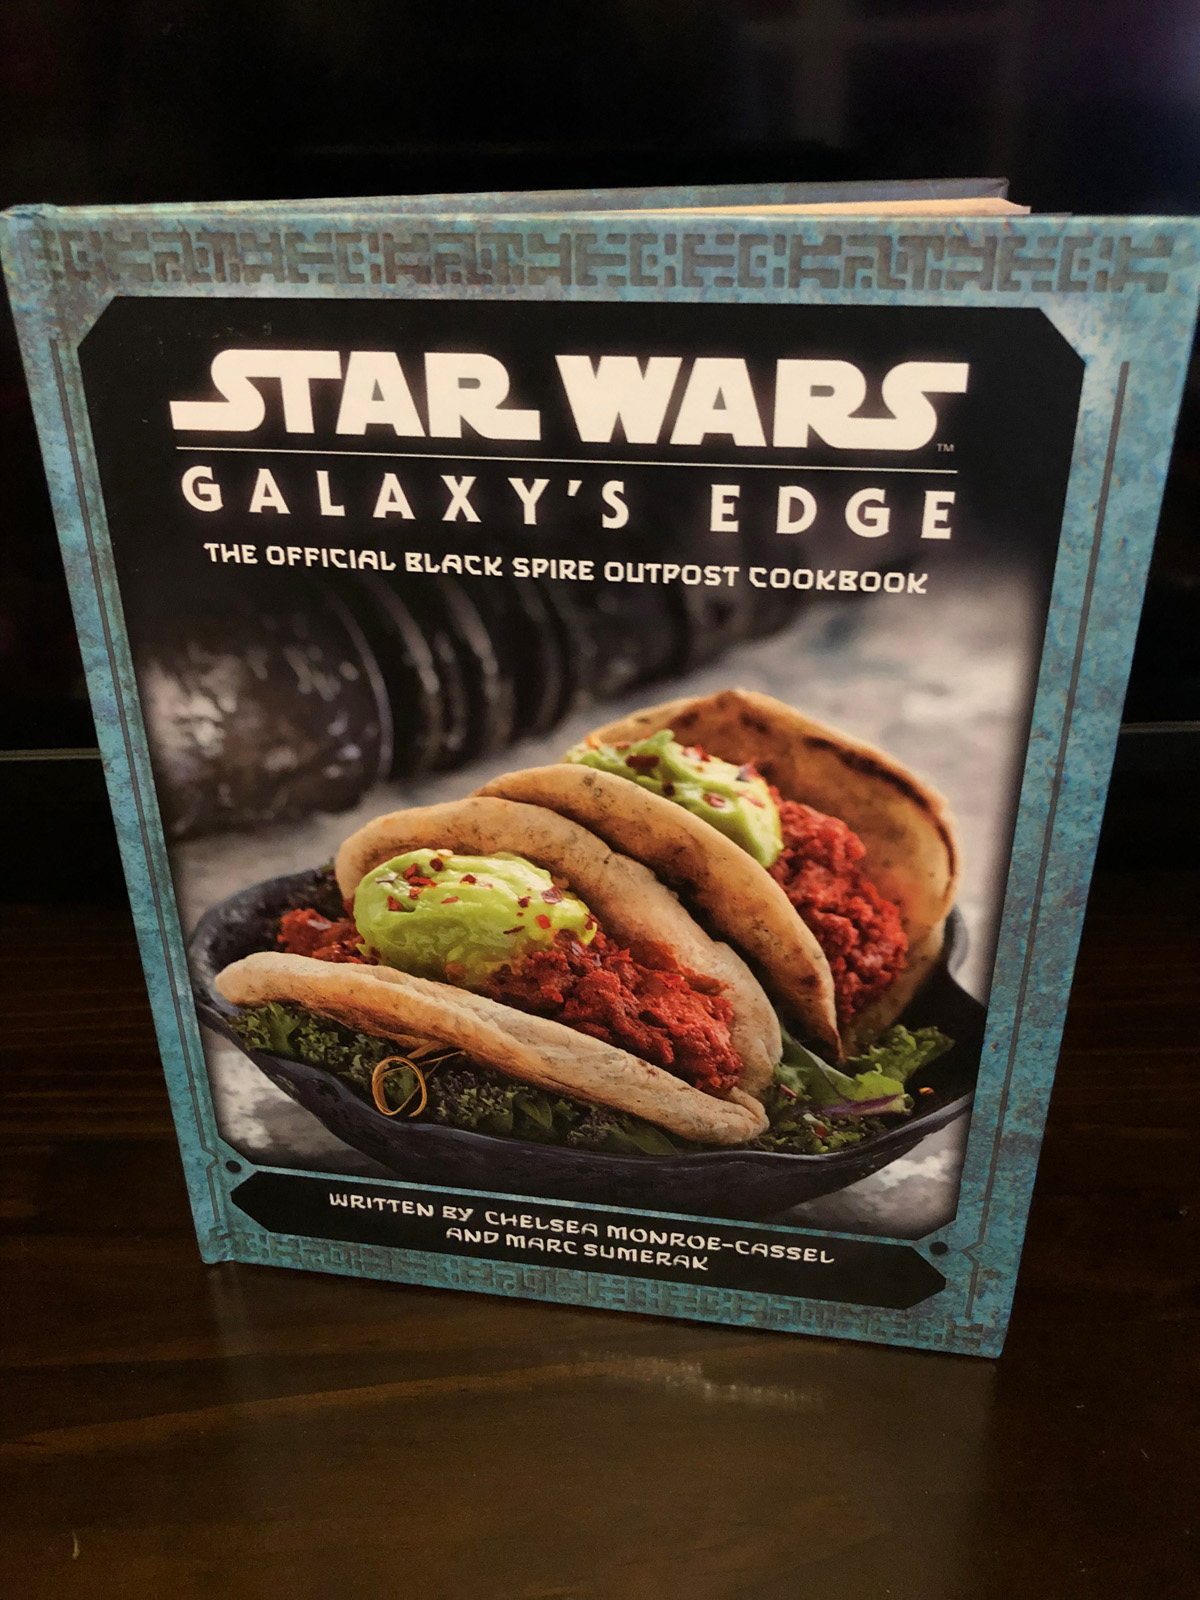 Galaxy's Edge: The Official Black Spire Outpost Cookbook